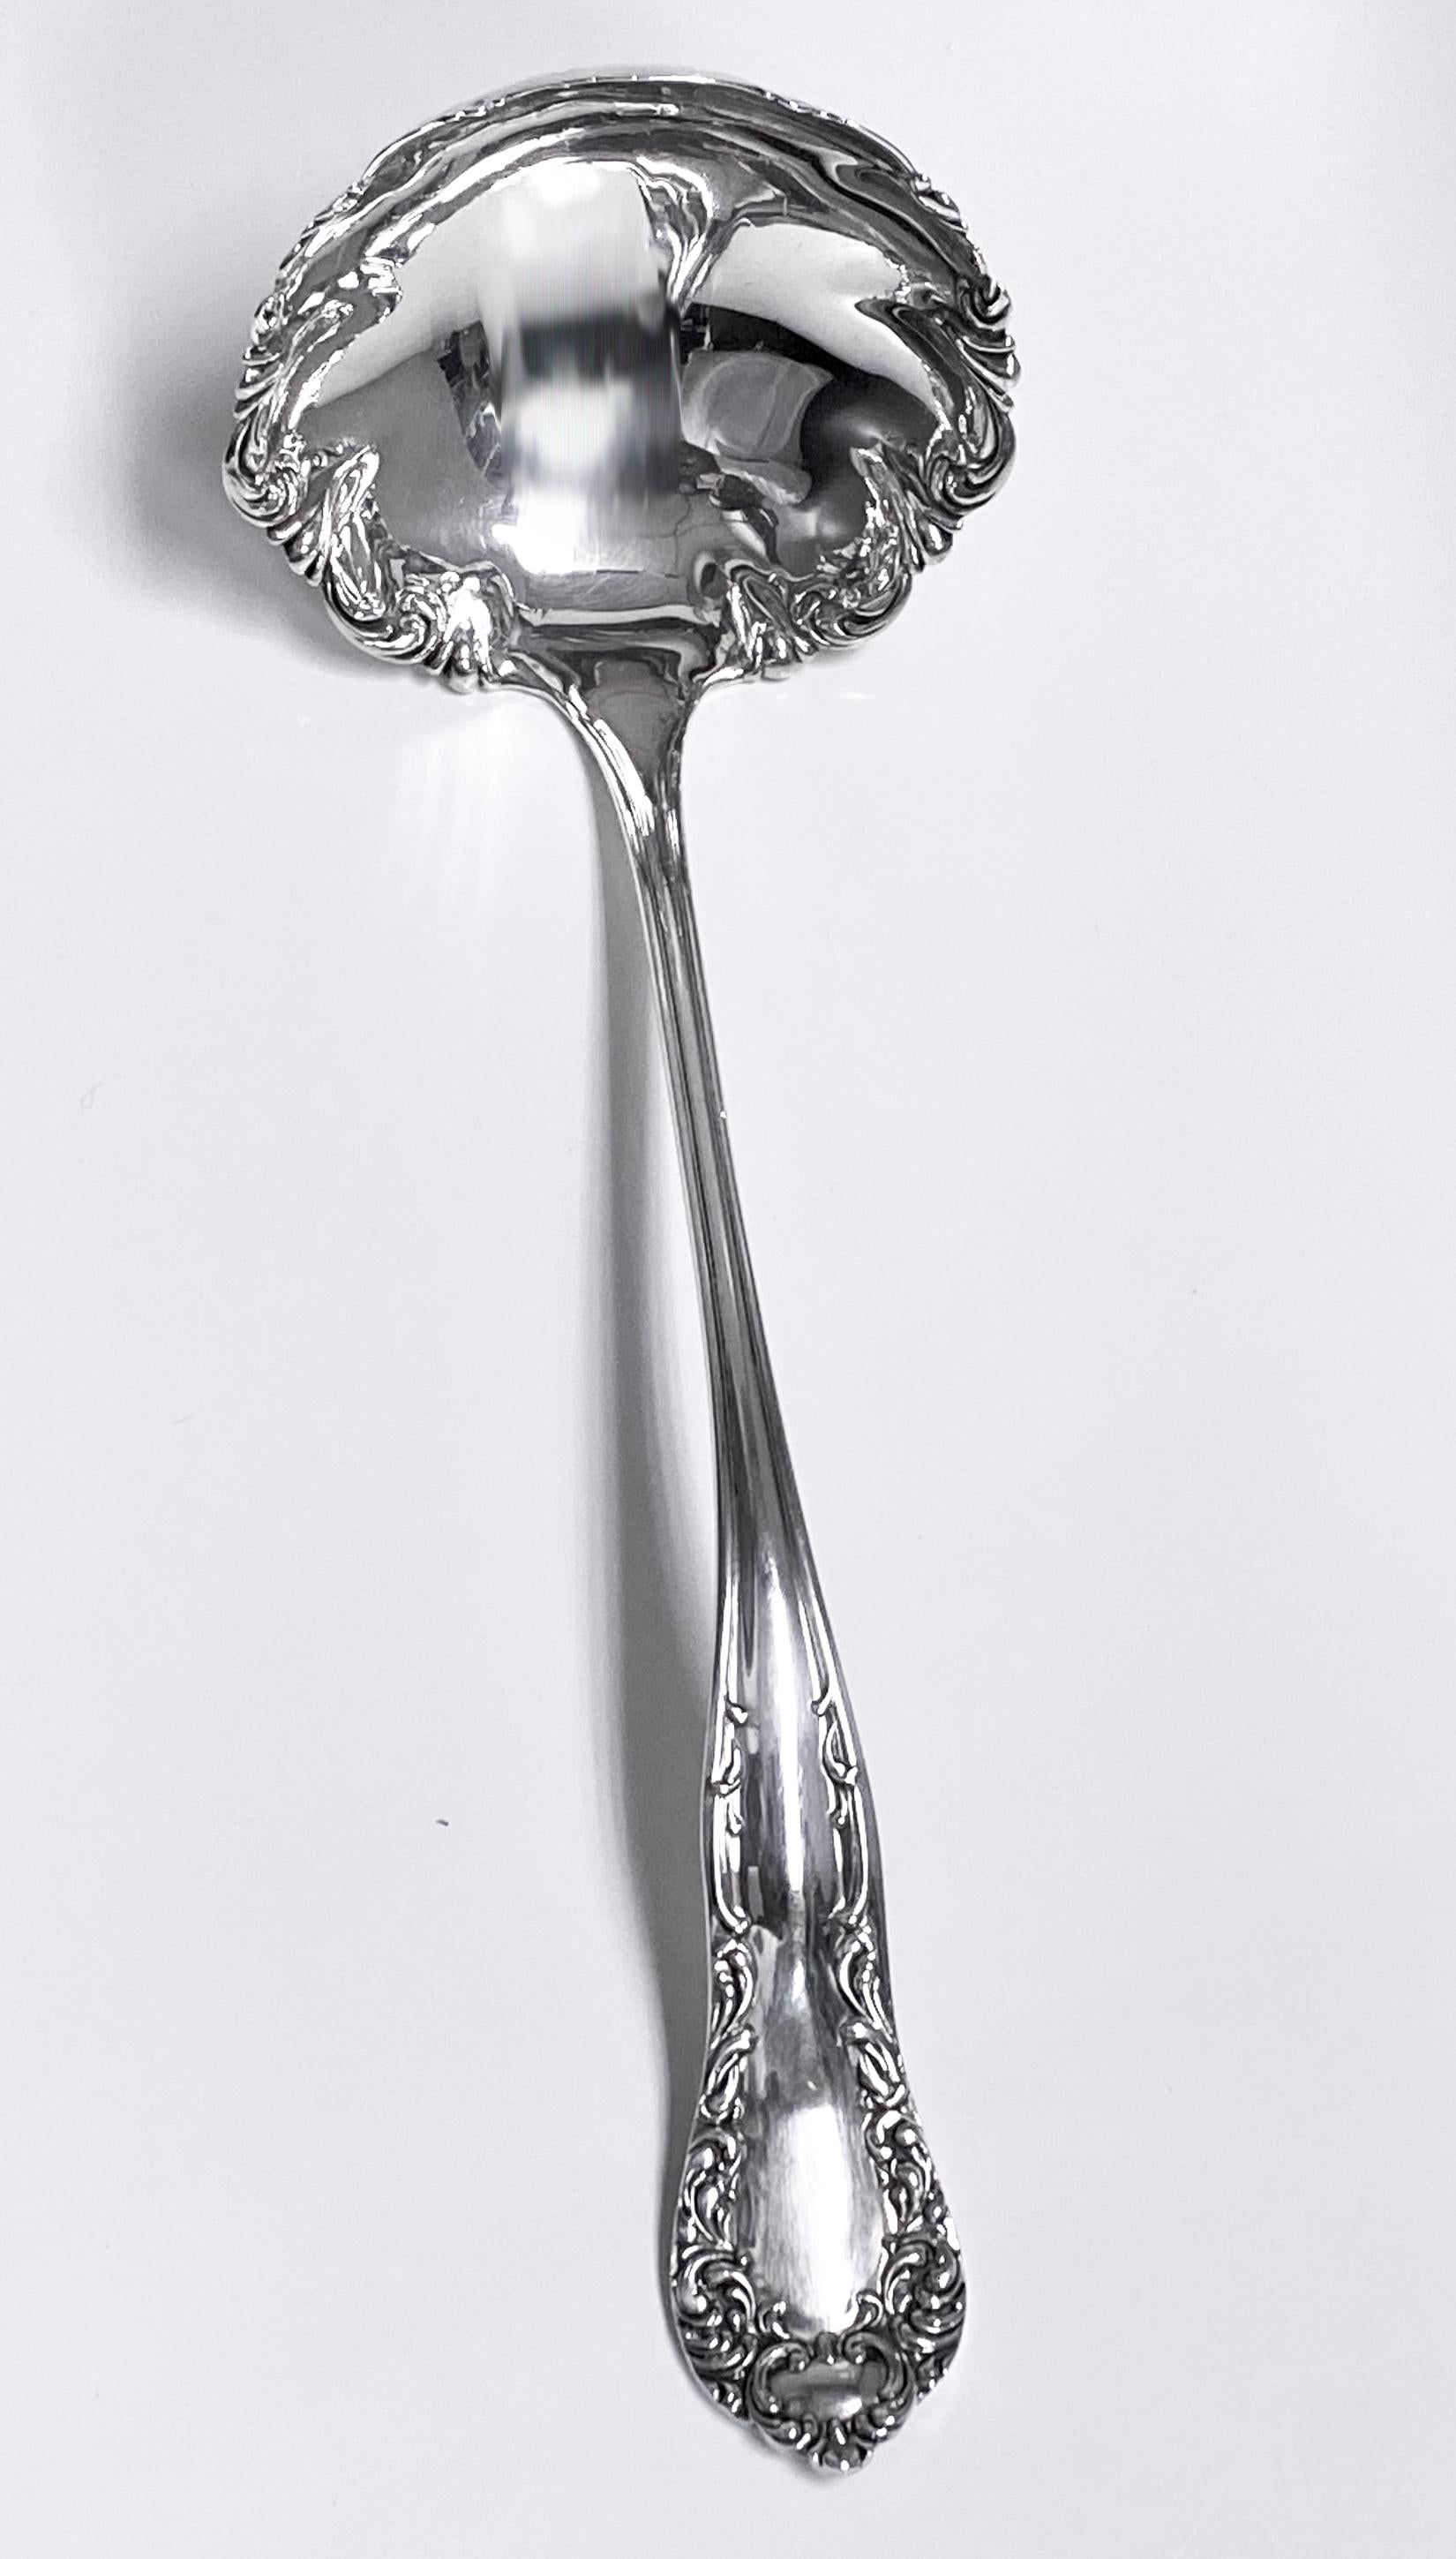 Diana Pattern International Sterling Silver Soup Ladle. Good condition. Reflections from photography only. Length: 10 inches. Weight: 149.8 grams